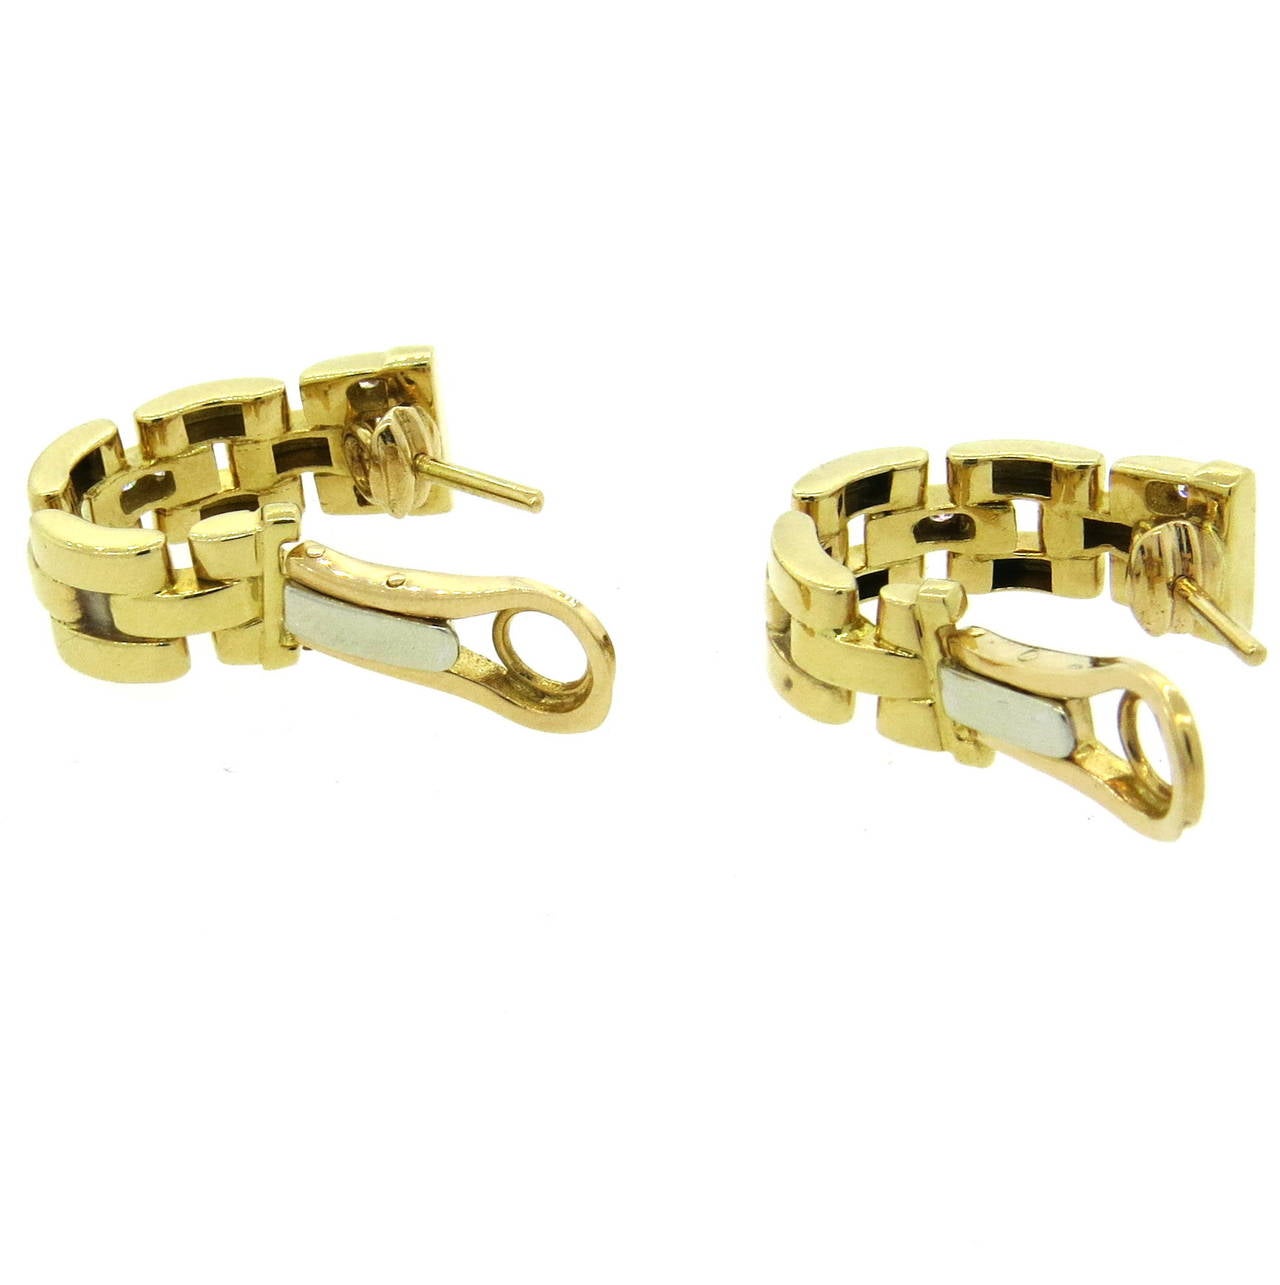 18k gold earrings by Cartier, from classic Panthere Maillon collection, adorned with diamonds. Earrings are 20mm long x 8mm wide. Marked Cartier,750,979656. Weight - 13.7 grams